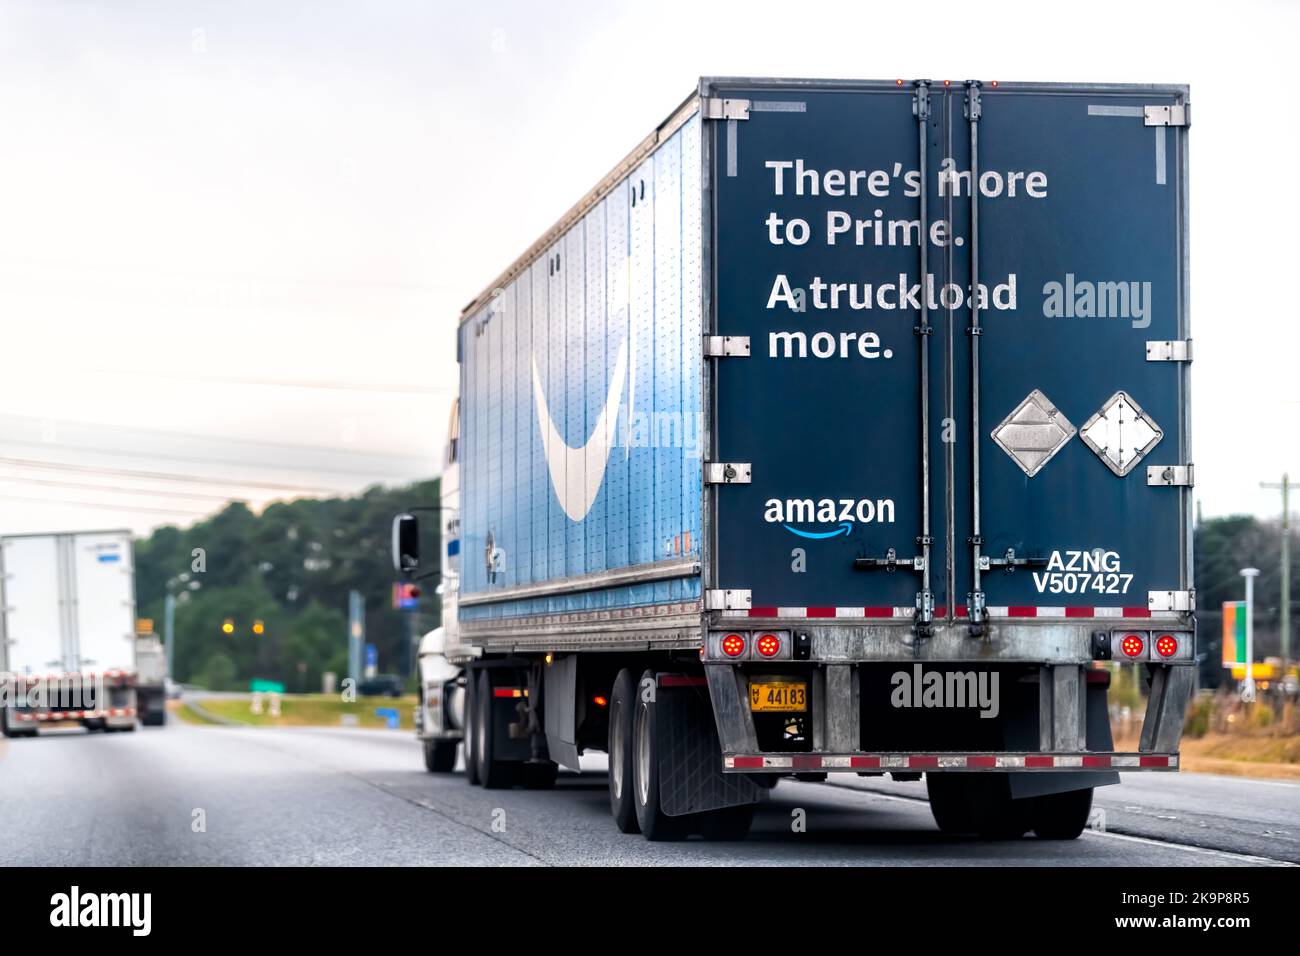 Greensboro, USA - January 7, 2021: North Carolina traffic highway road with driving truck for Amazon prime shipping delivery vehicle with Prime logo Stock Photo